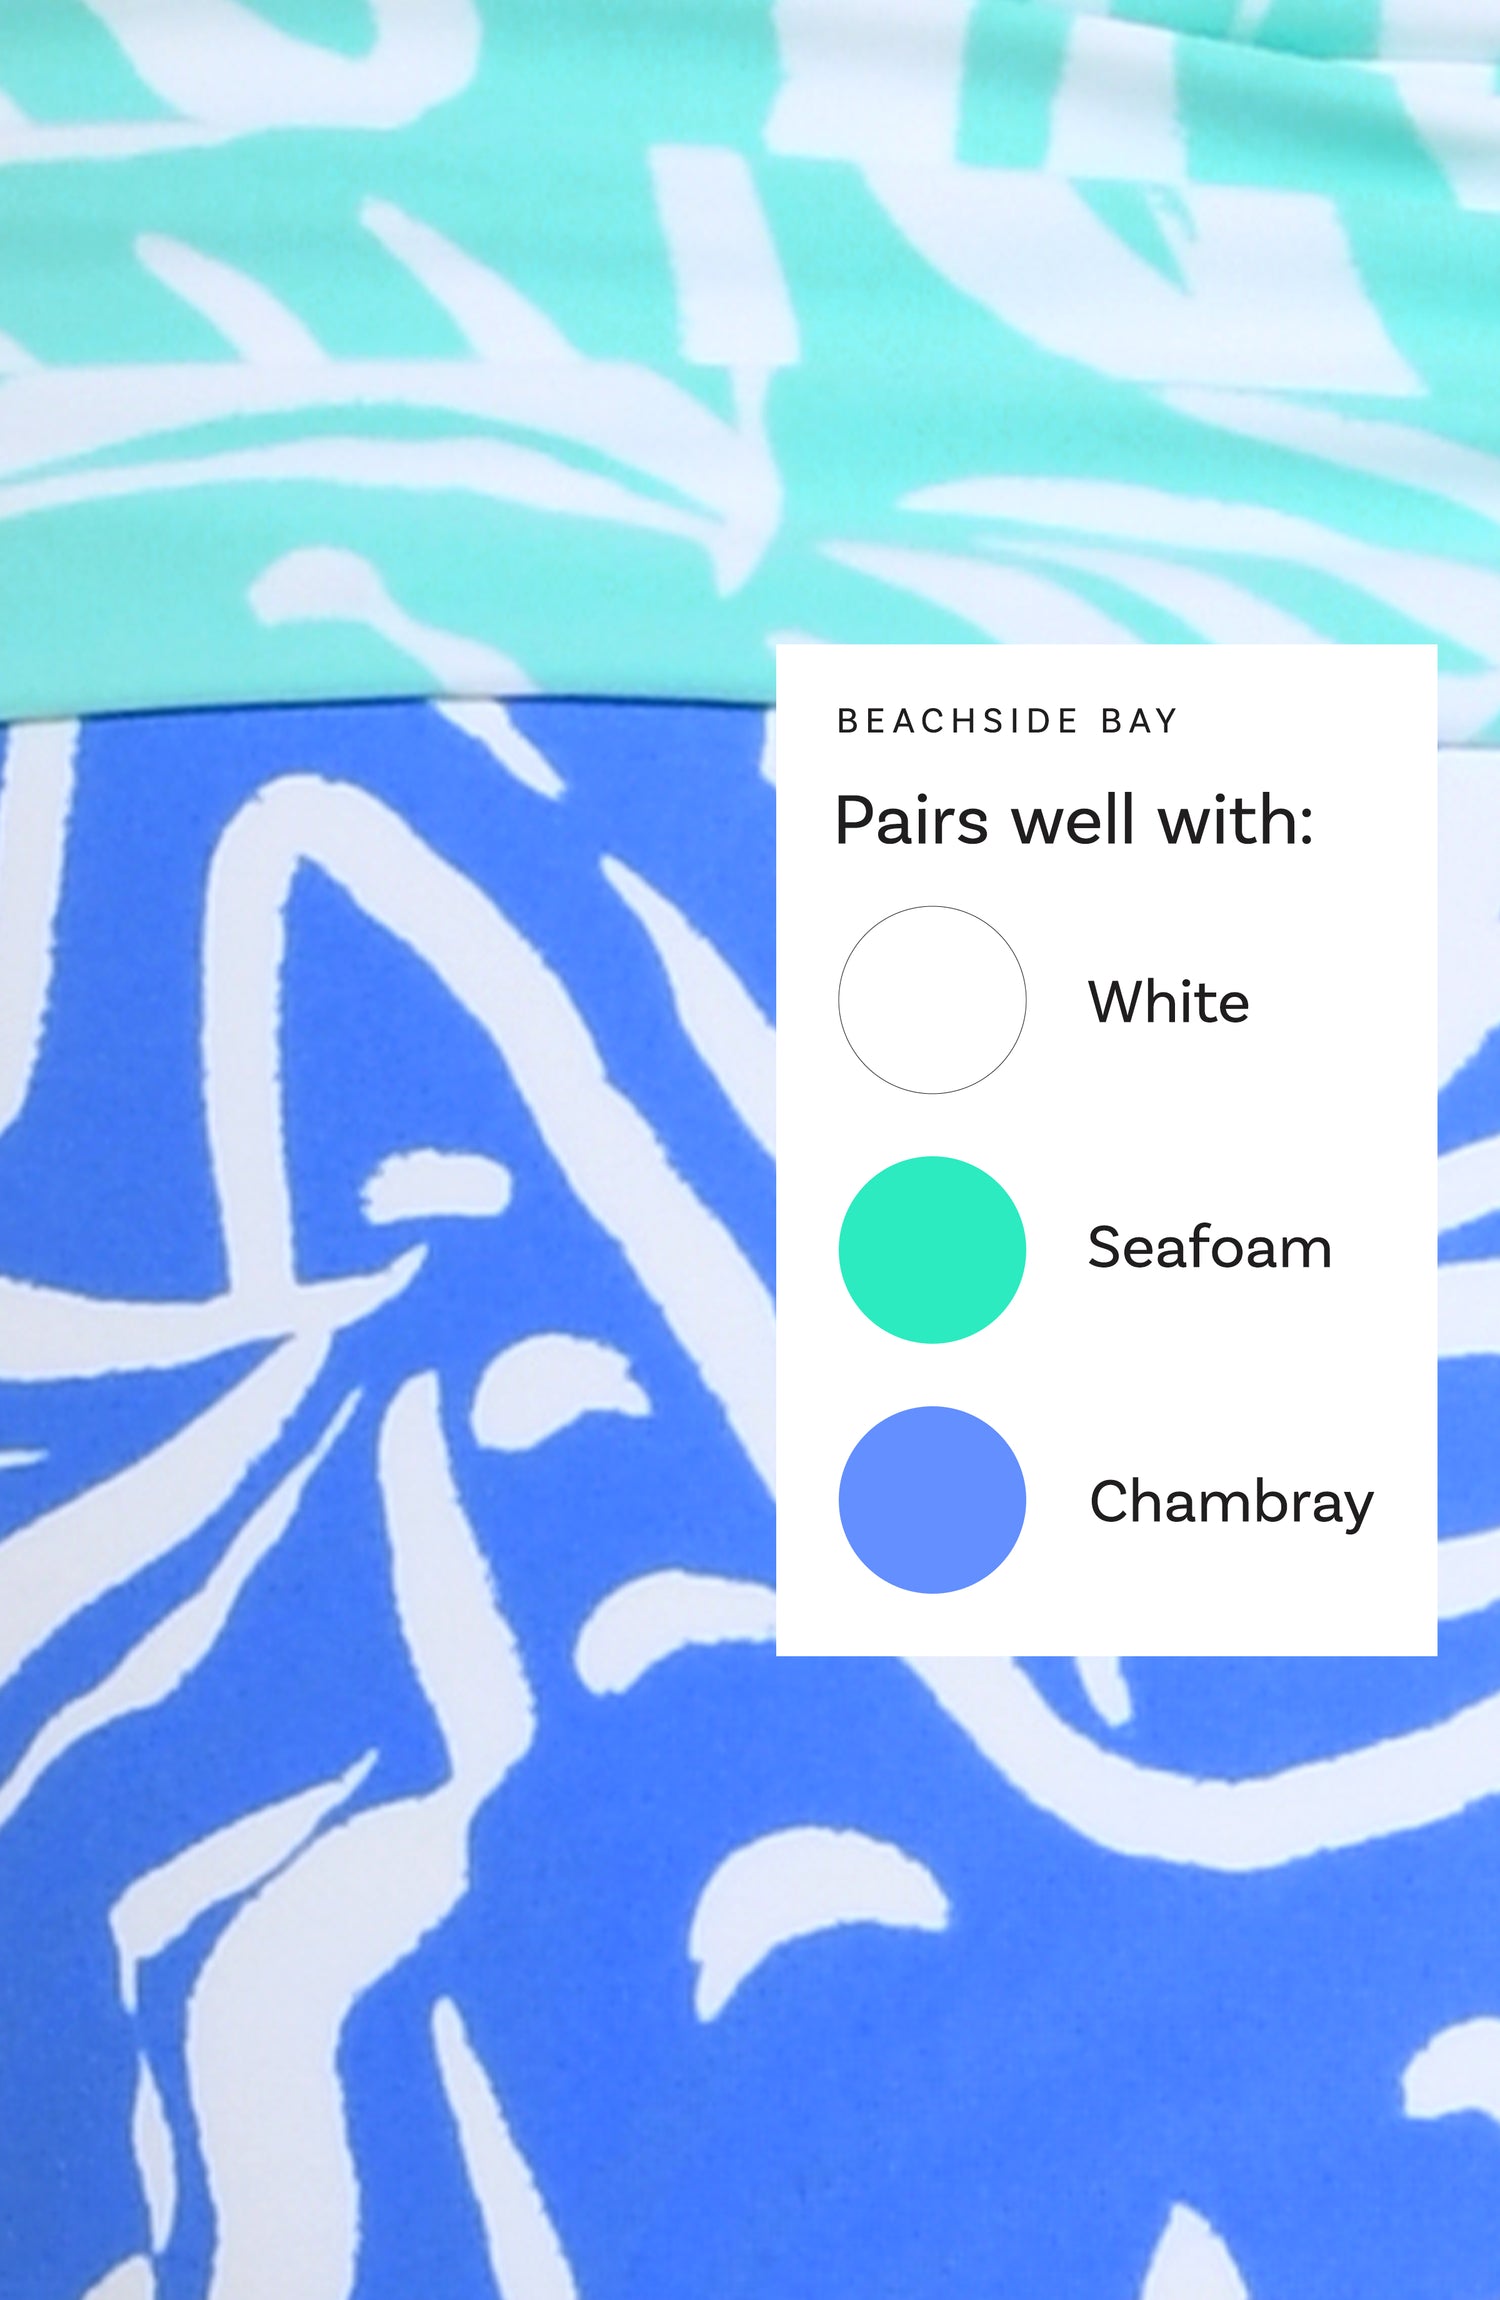 This is a Beachside Bay swim collection Color Chart suggesting the following corresponding colors: White, Seafoam, and Chambray.